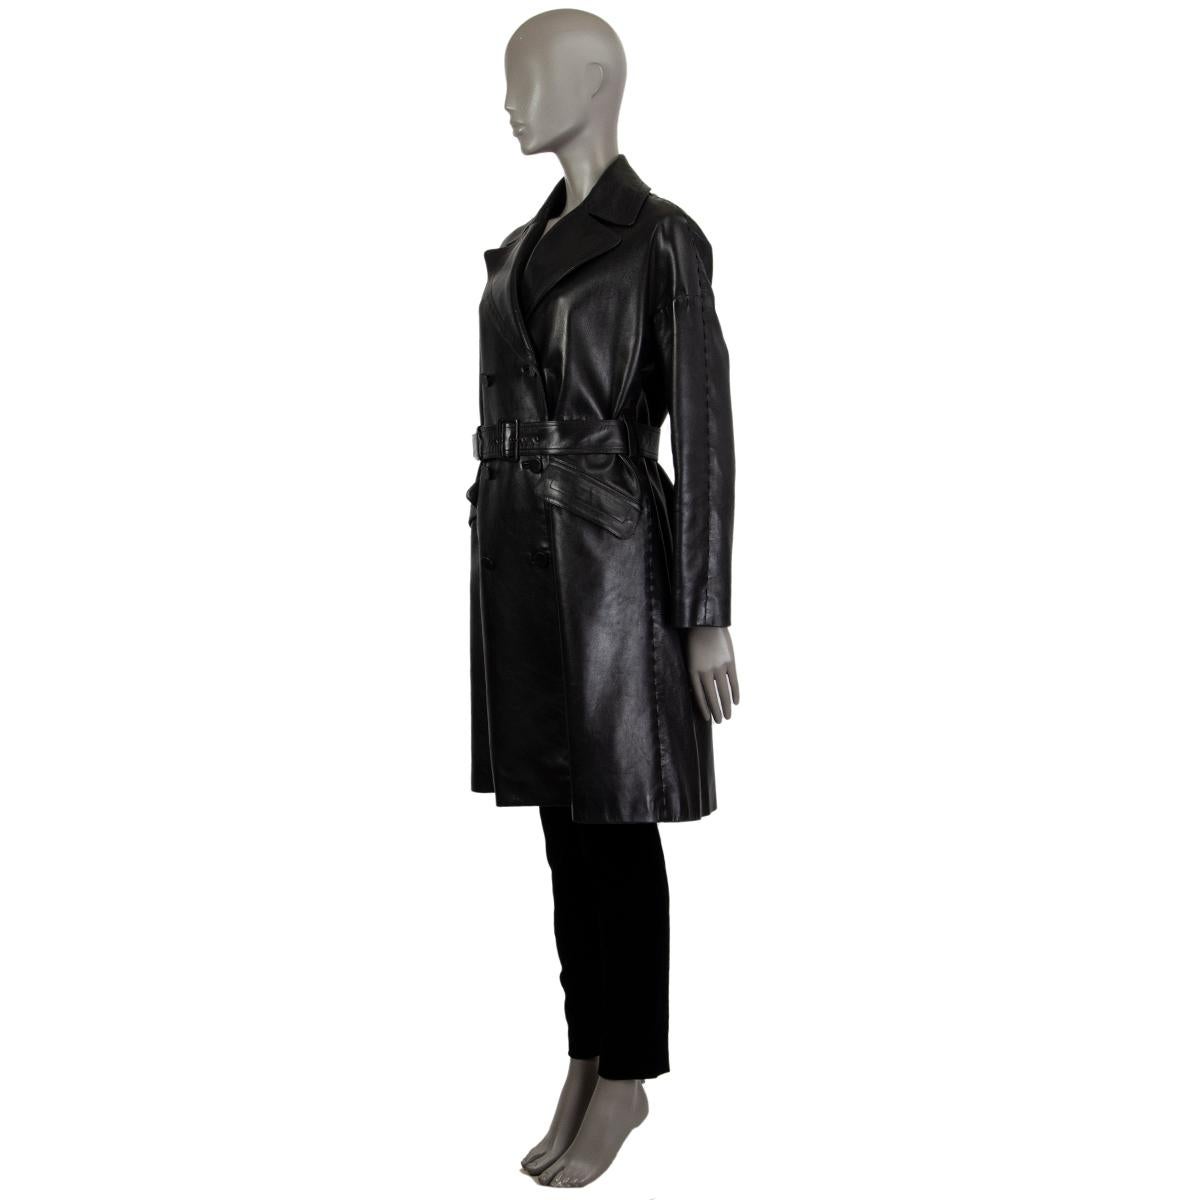 Alaia trench coat in black lambskin. With wide notch colar, belt loops at the waist, two flap pockets on the front sides, box pleat on the back, and woven seams. Closes with flat lether buttons on the front. Lined in black acetate (68%) and viscose